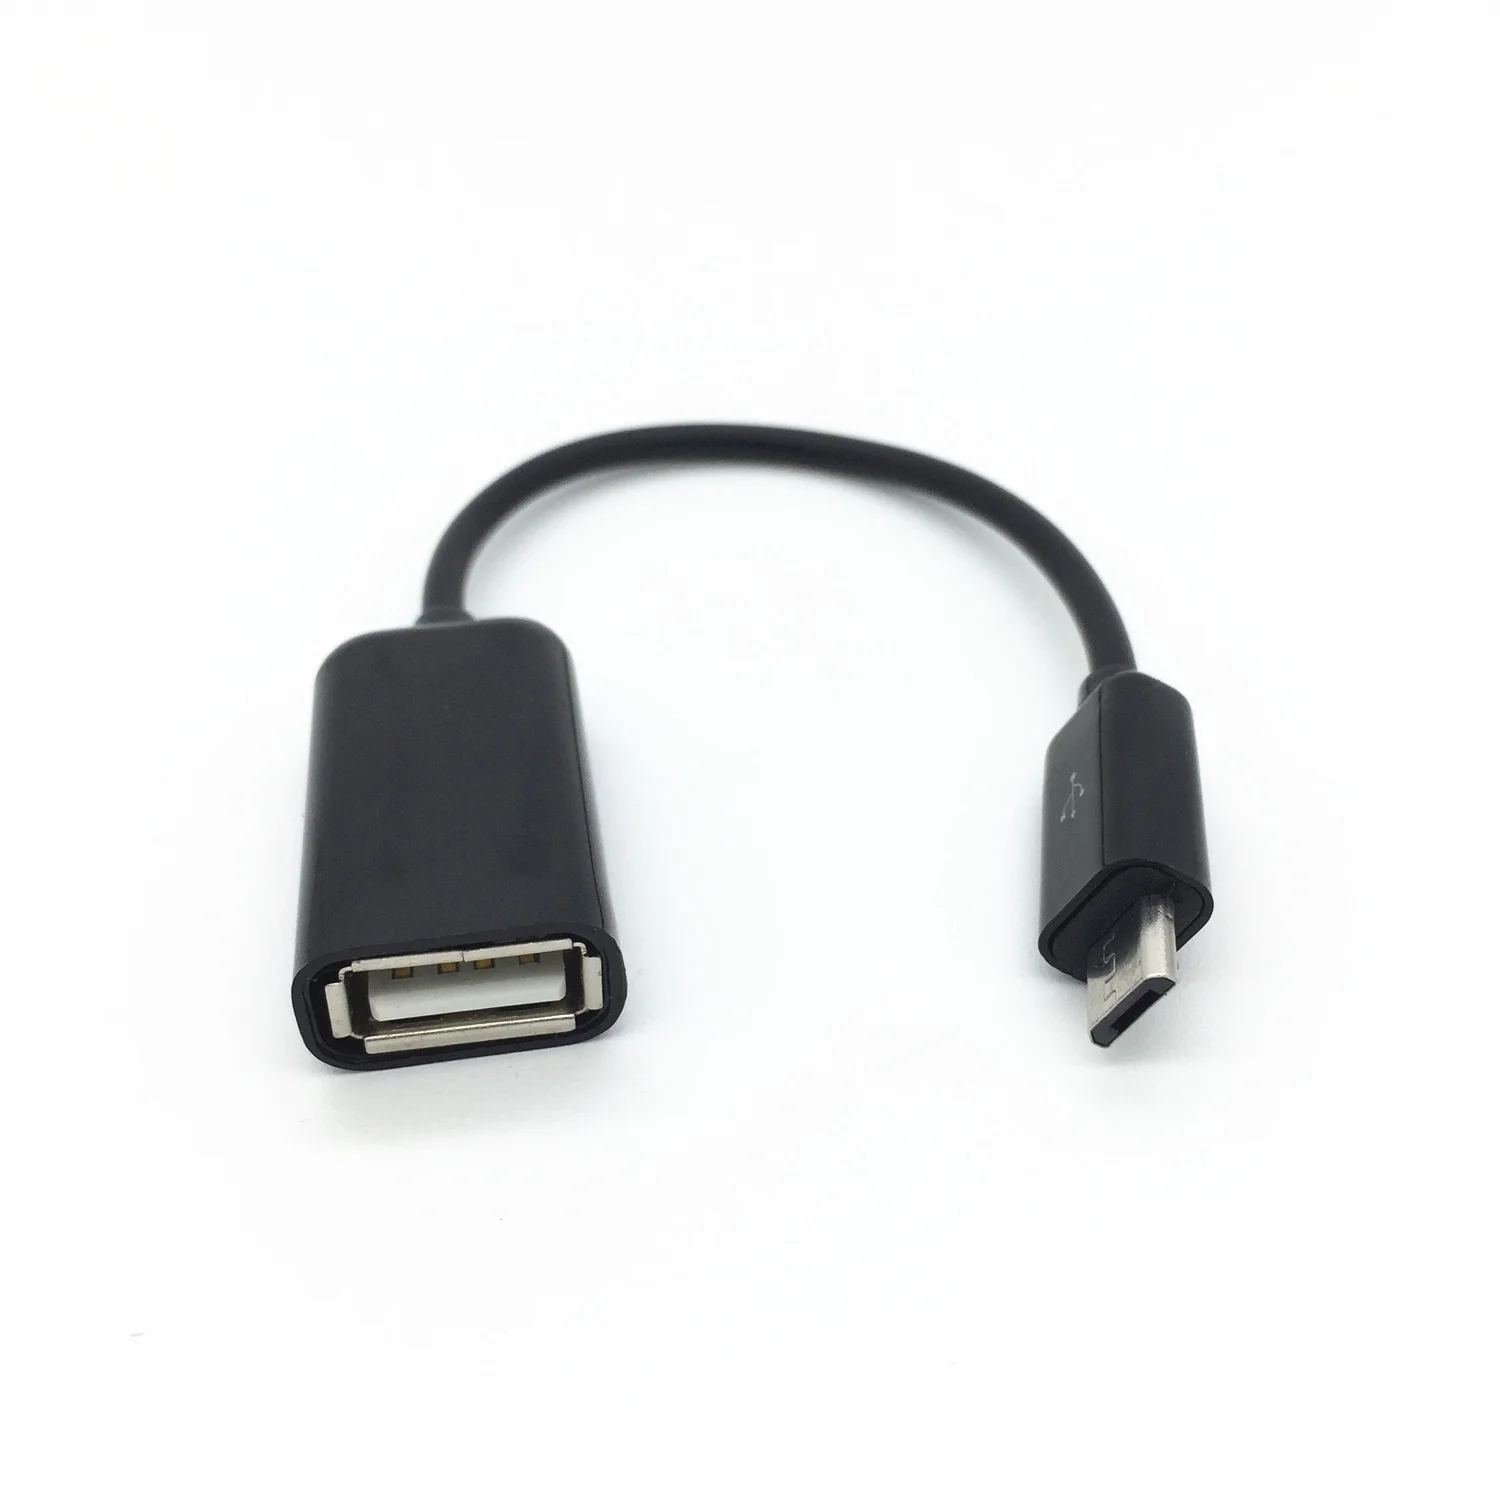 

USB Host OTG Adaptor Adapter Cable Cord for Samsung Galaxy Note II 2 GT-N7100 SCH-i605 SGH-i317 S2 S II 4G SGH-i777 T989